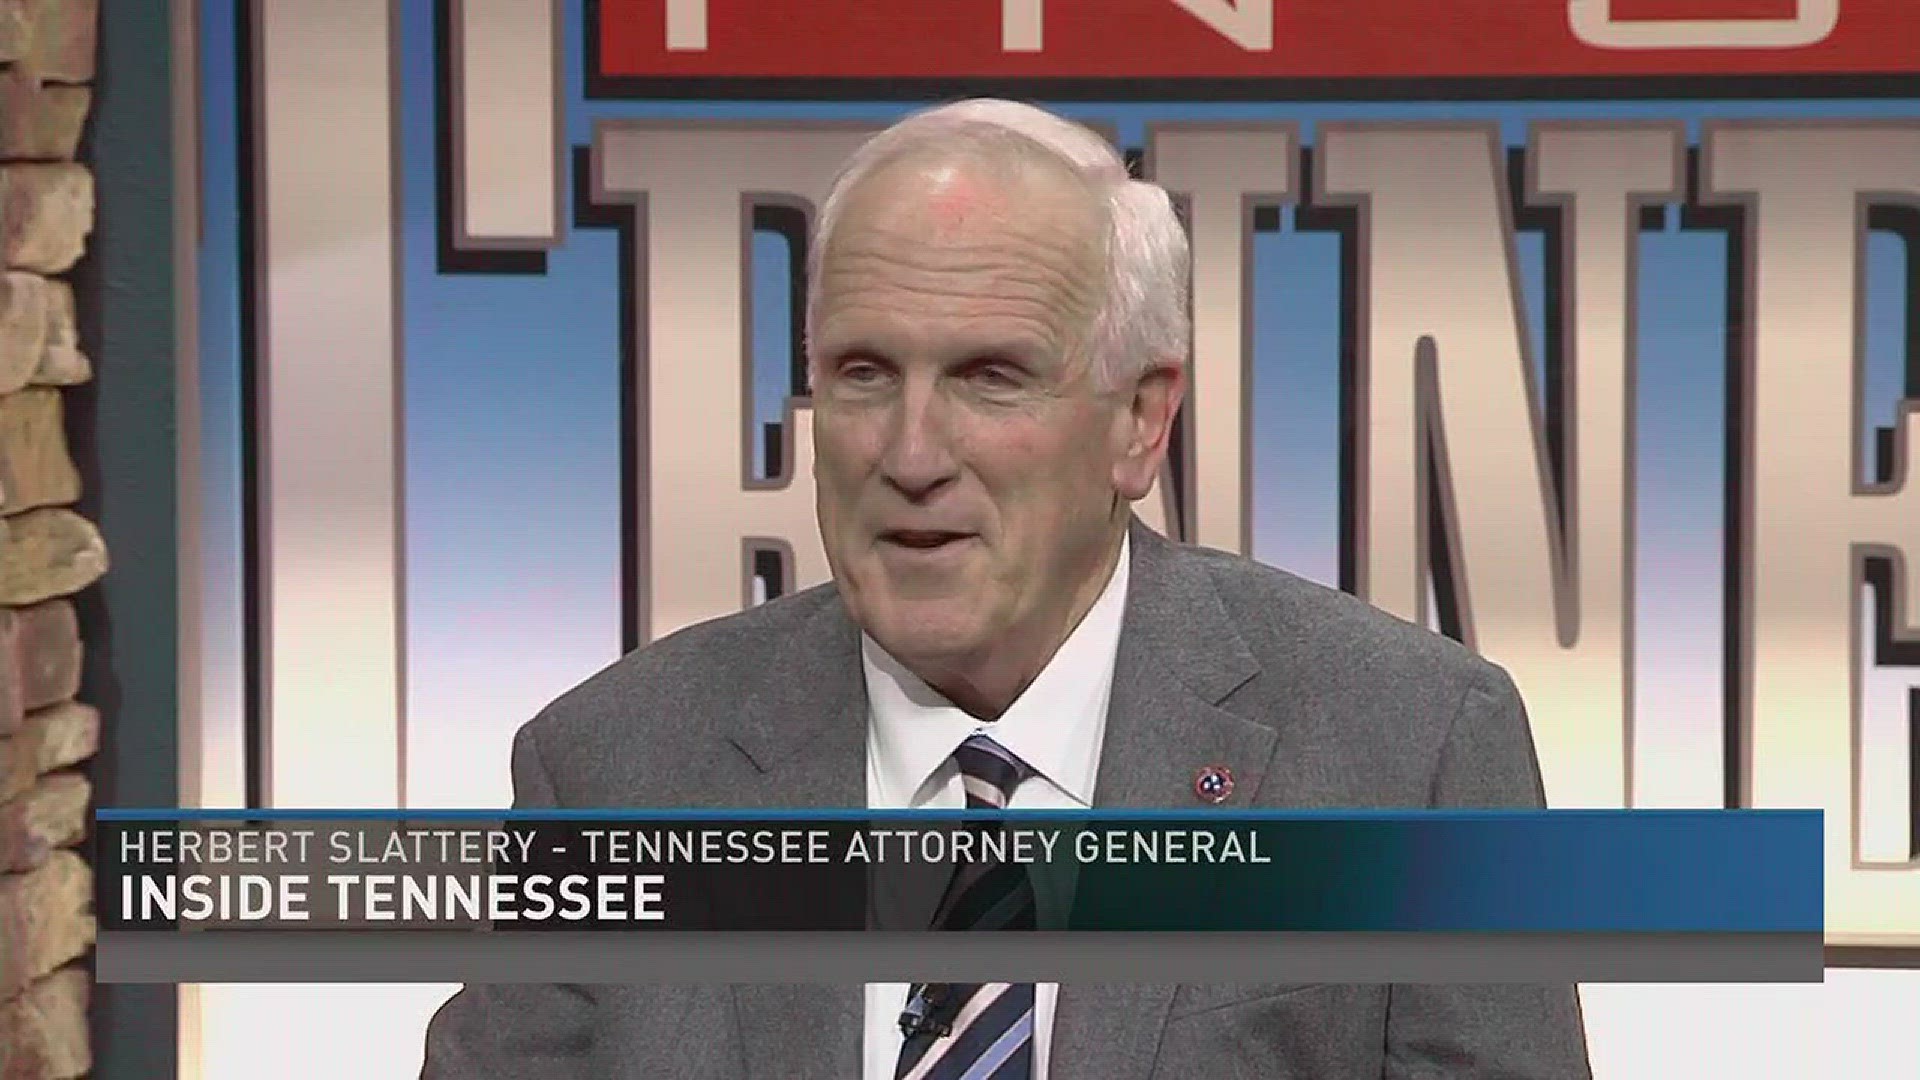 Tennessee Attorney General Herbert Slatery talks about leading the state's legal team including efforts to address the opioid crisis.